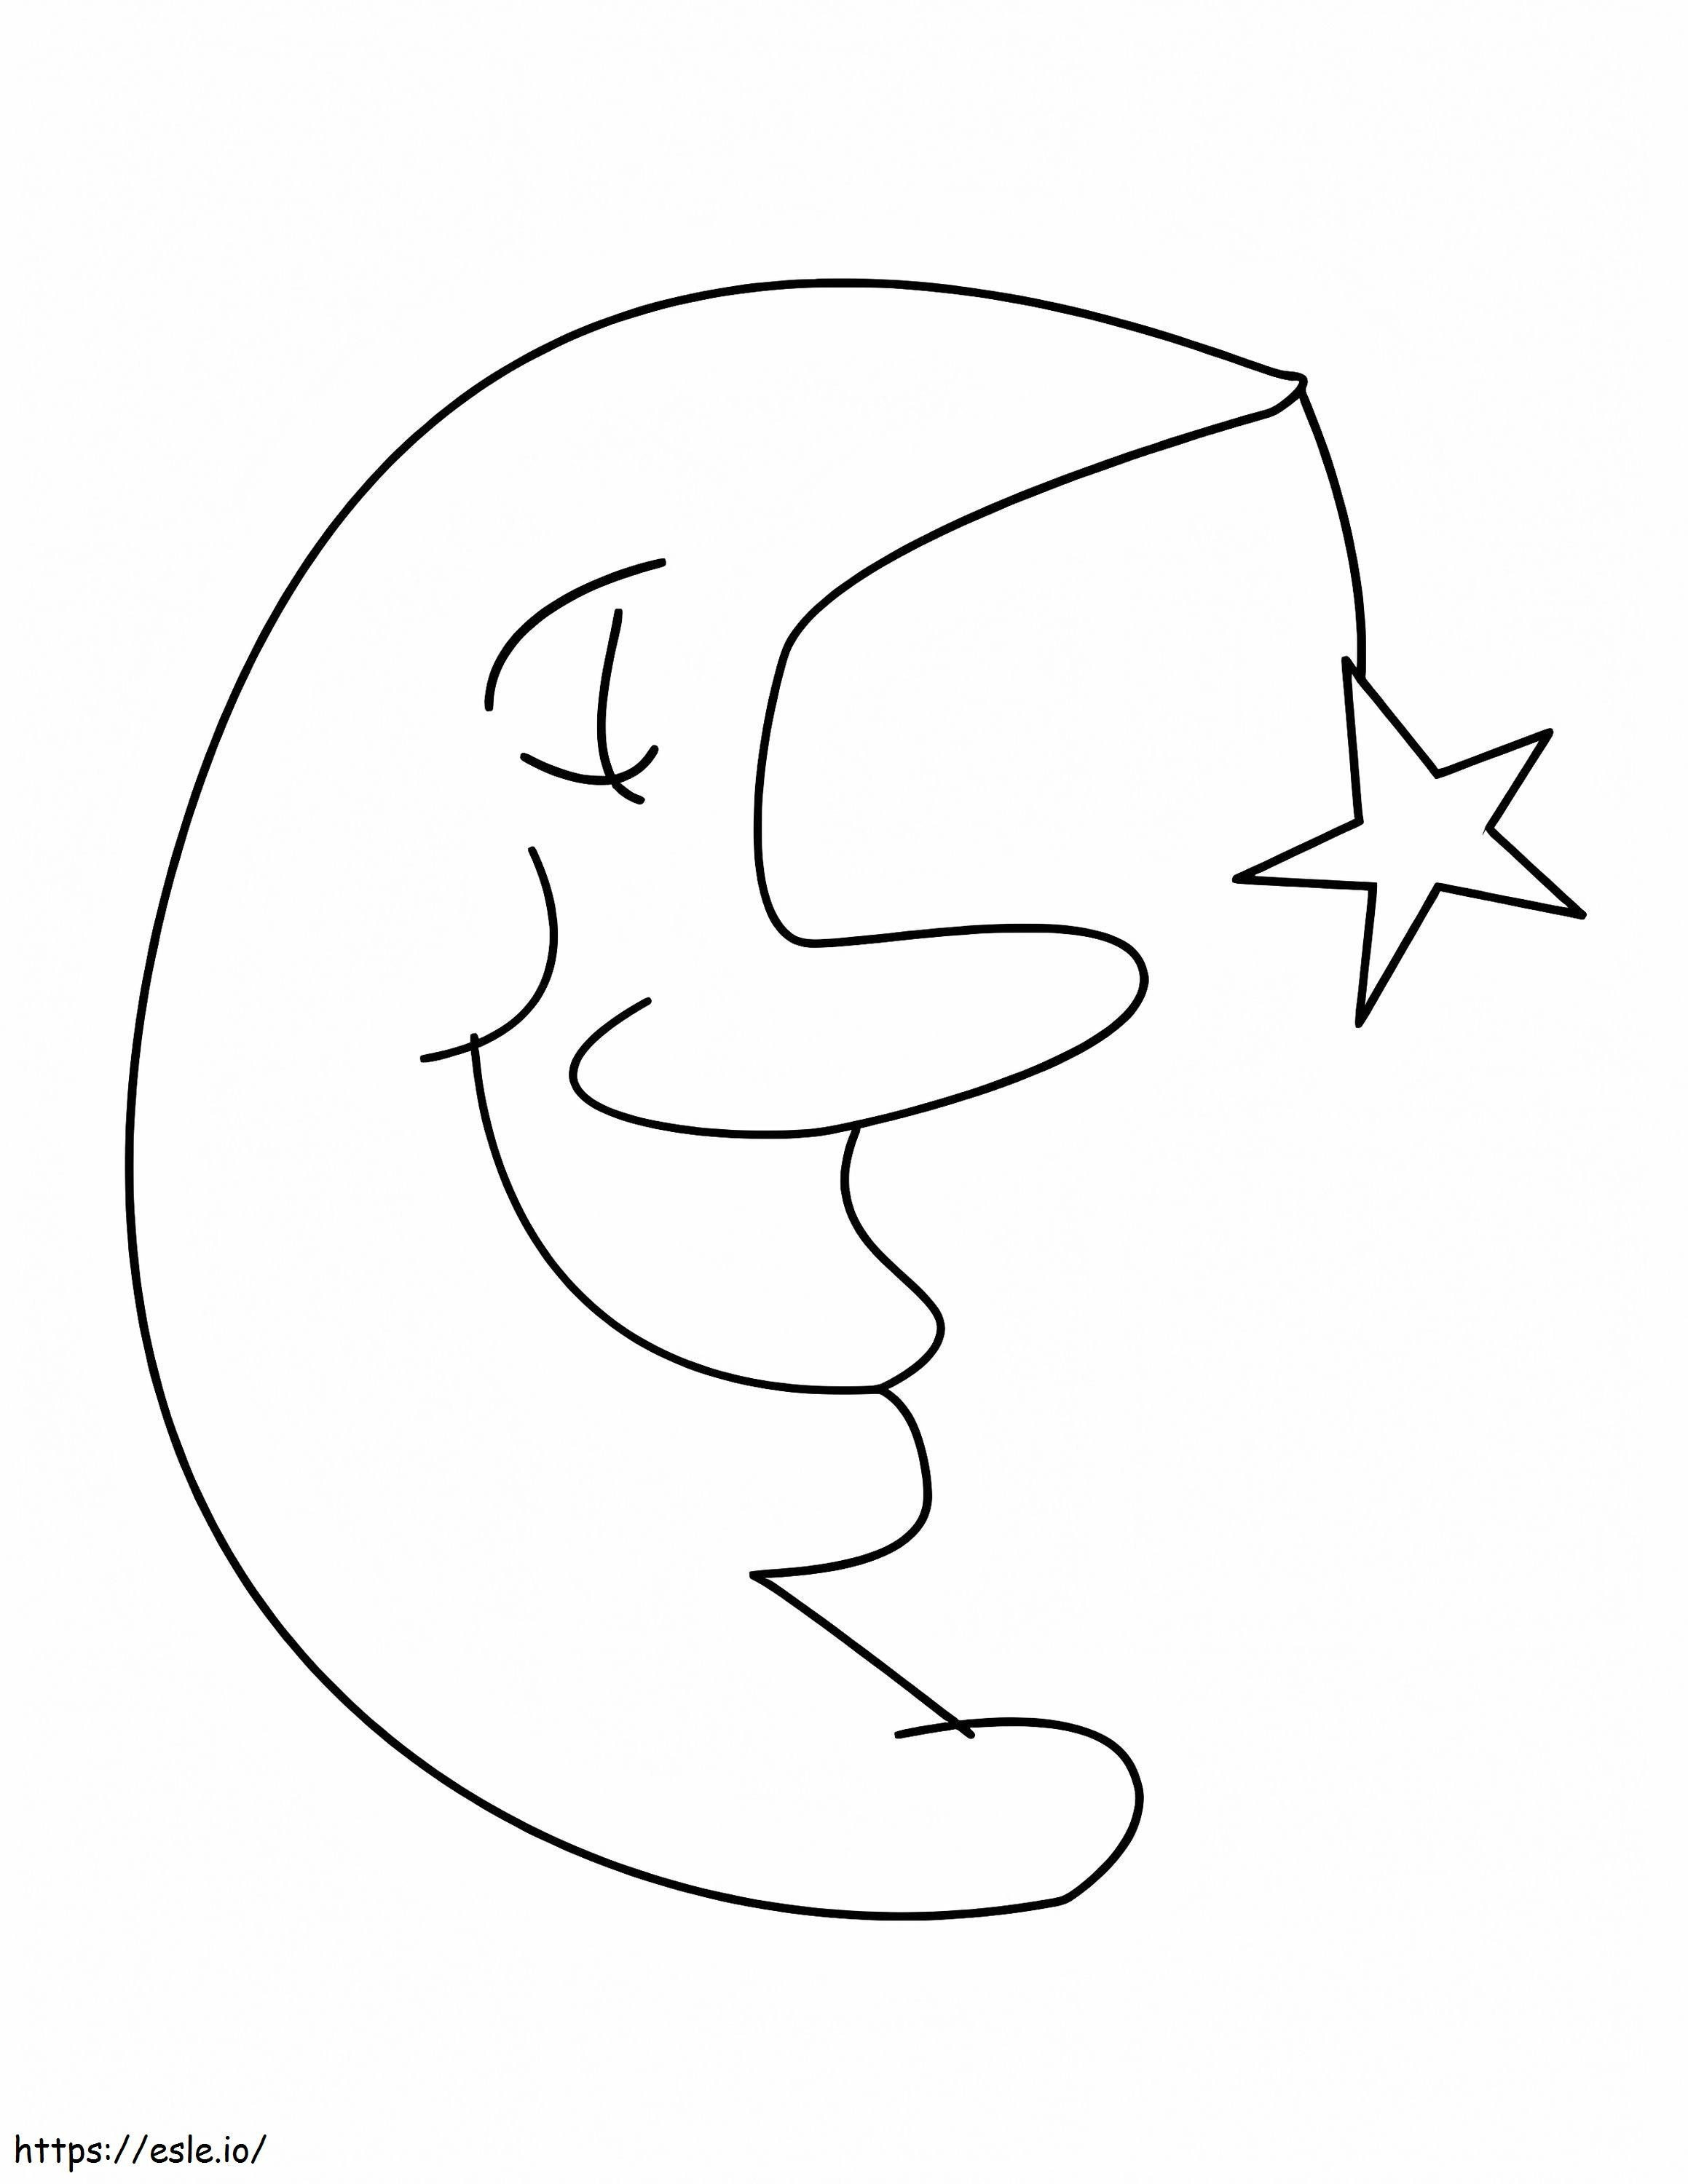 Large Moon coloring page